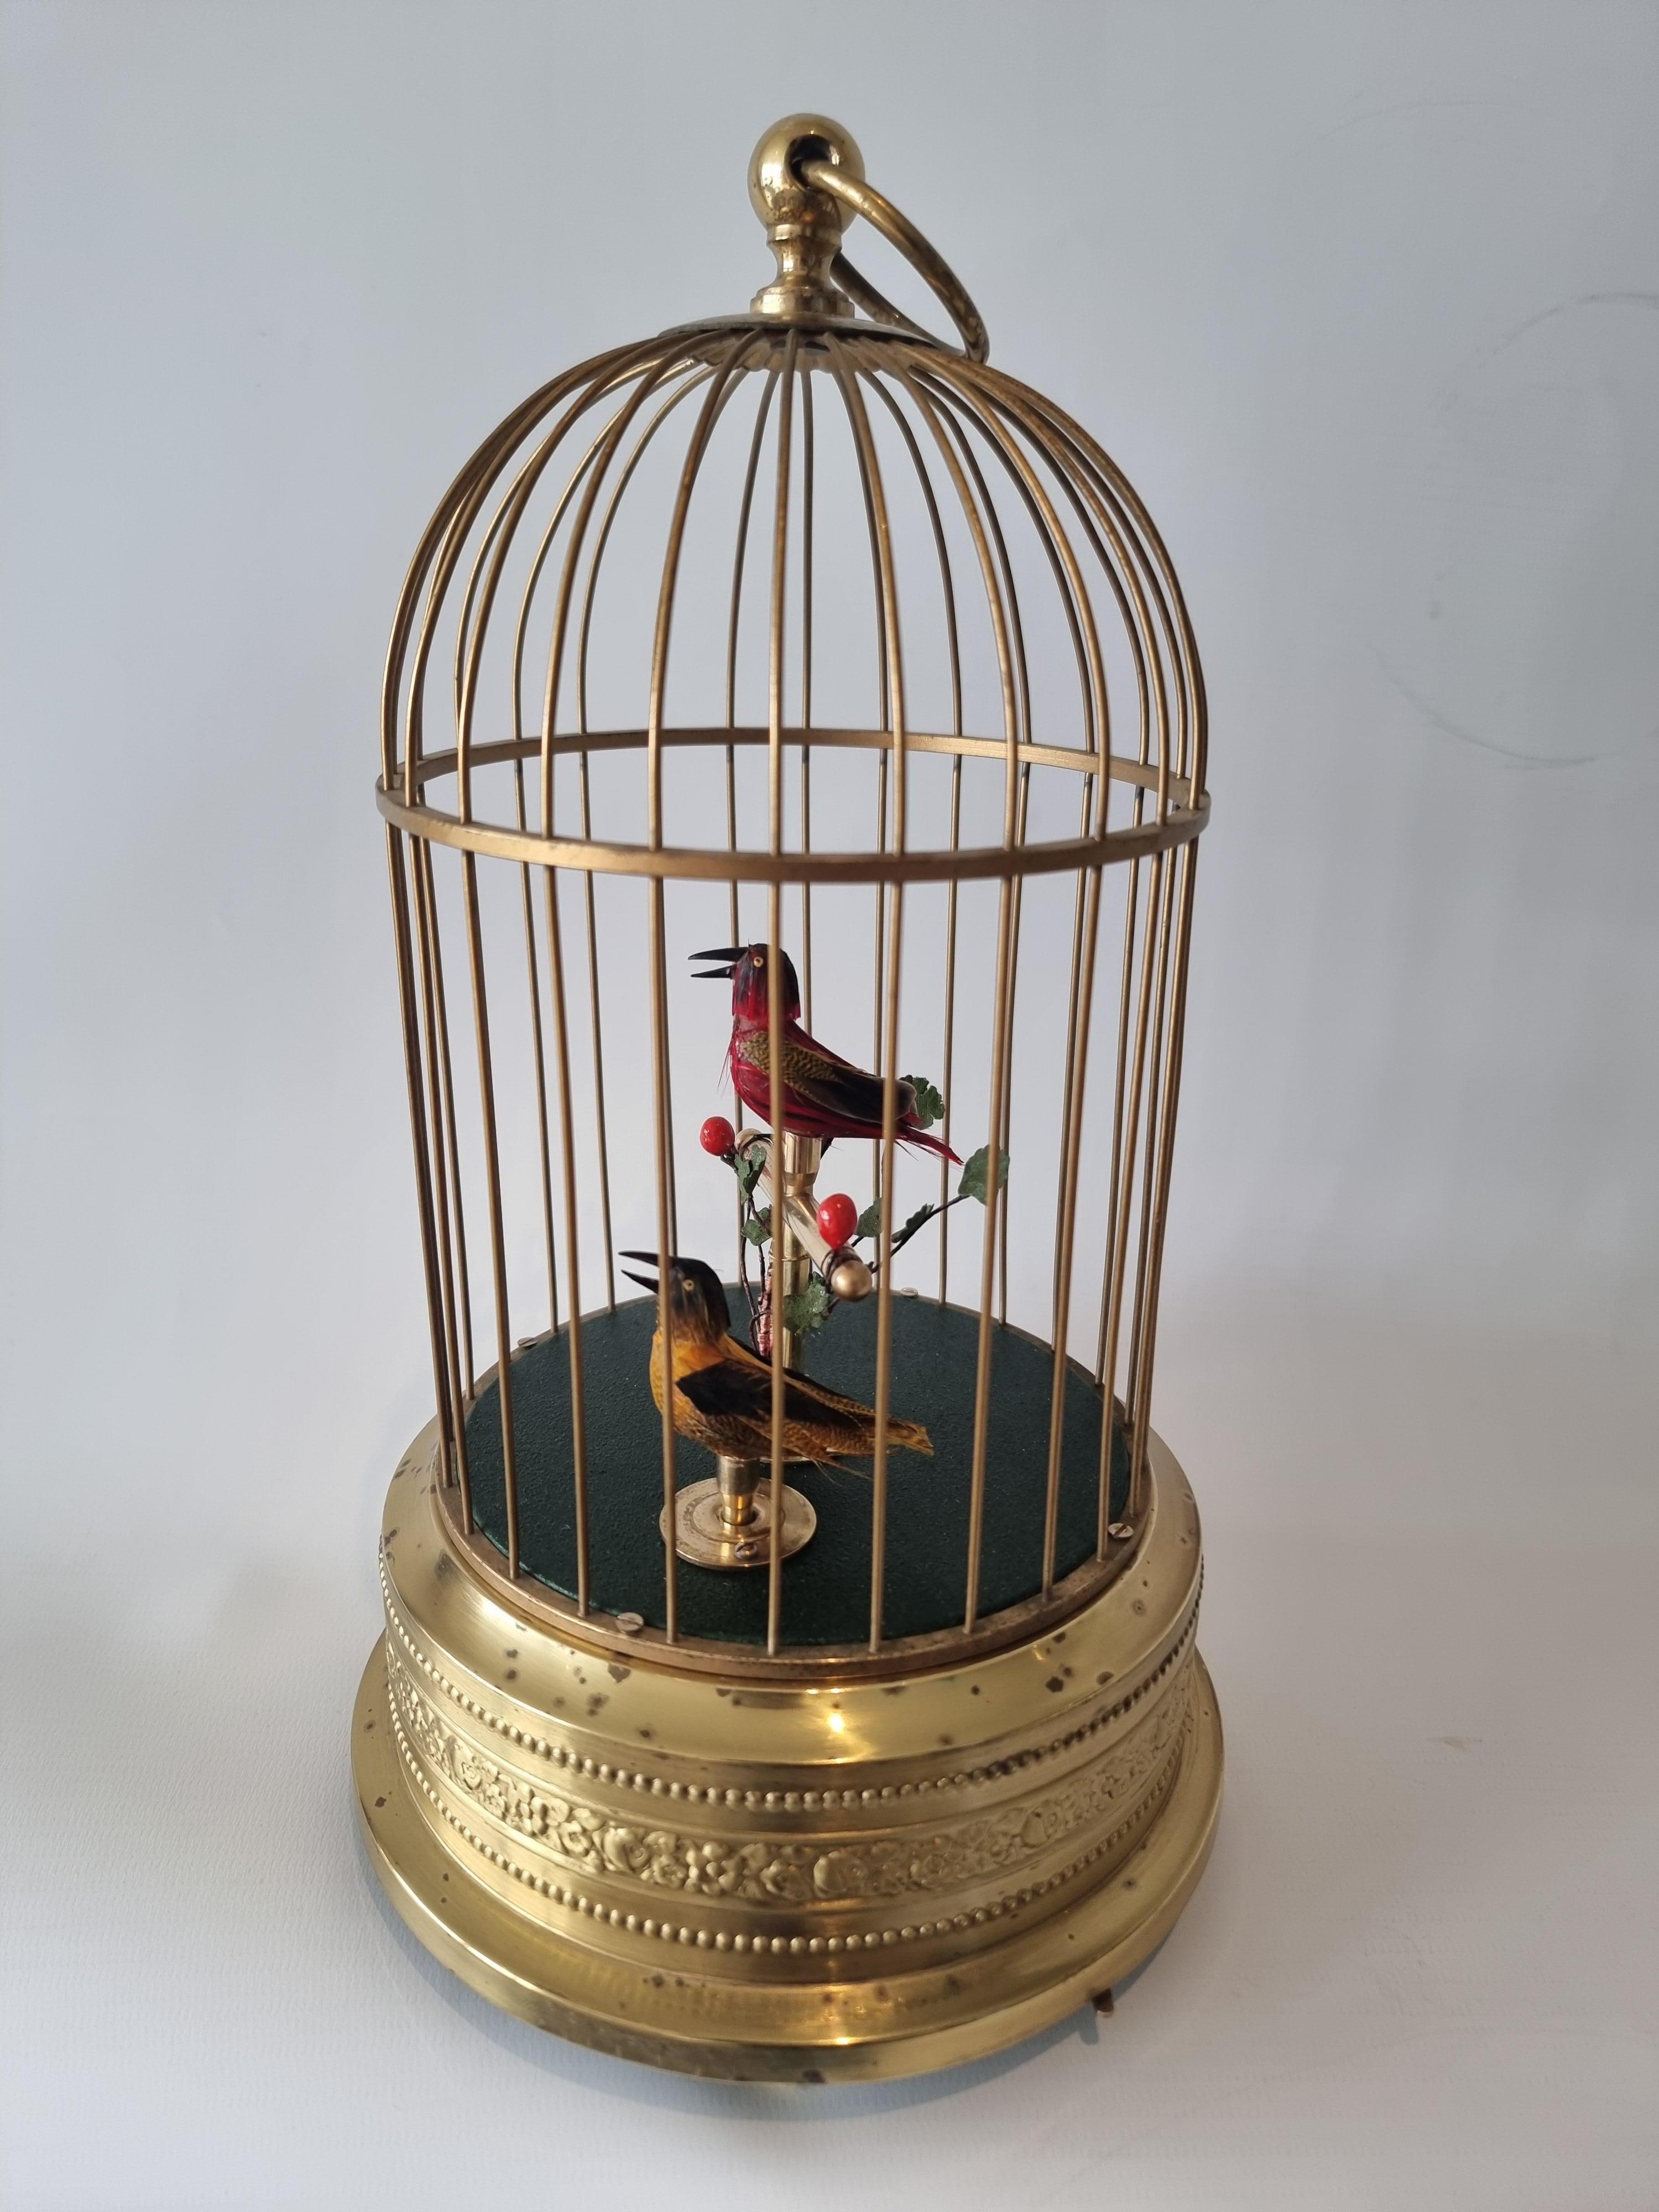 A vintage small double singing birds-in-cage, by Karl Griesbaum,
 
German
 
second half 20th century
 
Going-barrel movement
 
Perfect duet, singing in the minuet
 
When wound by the captive key and the start/stop lever actuated, the first of the